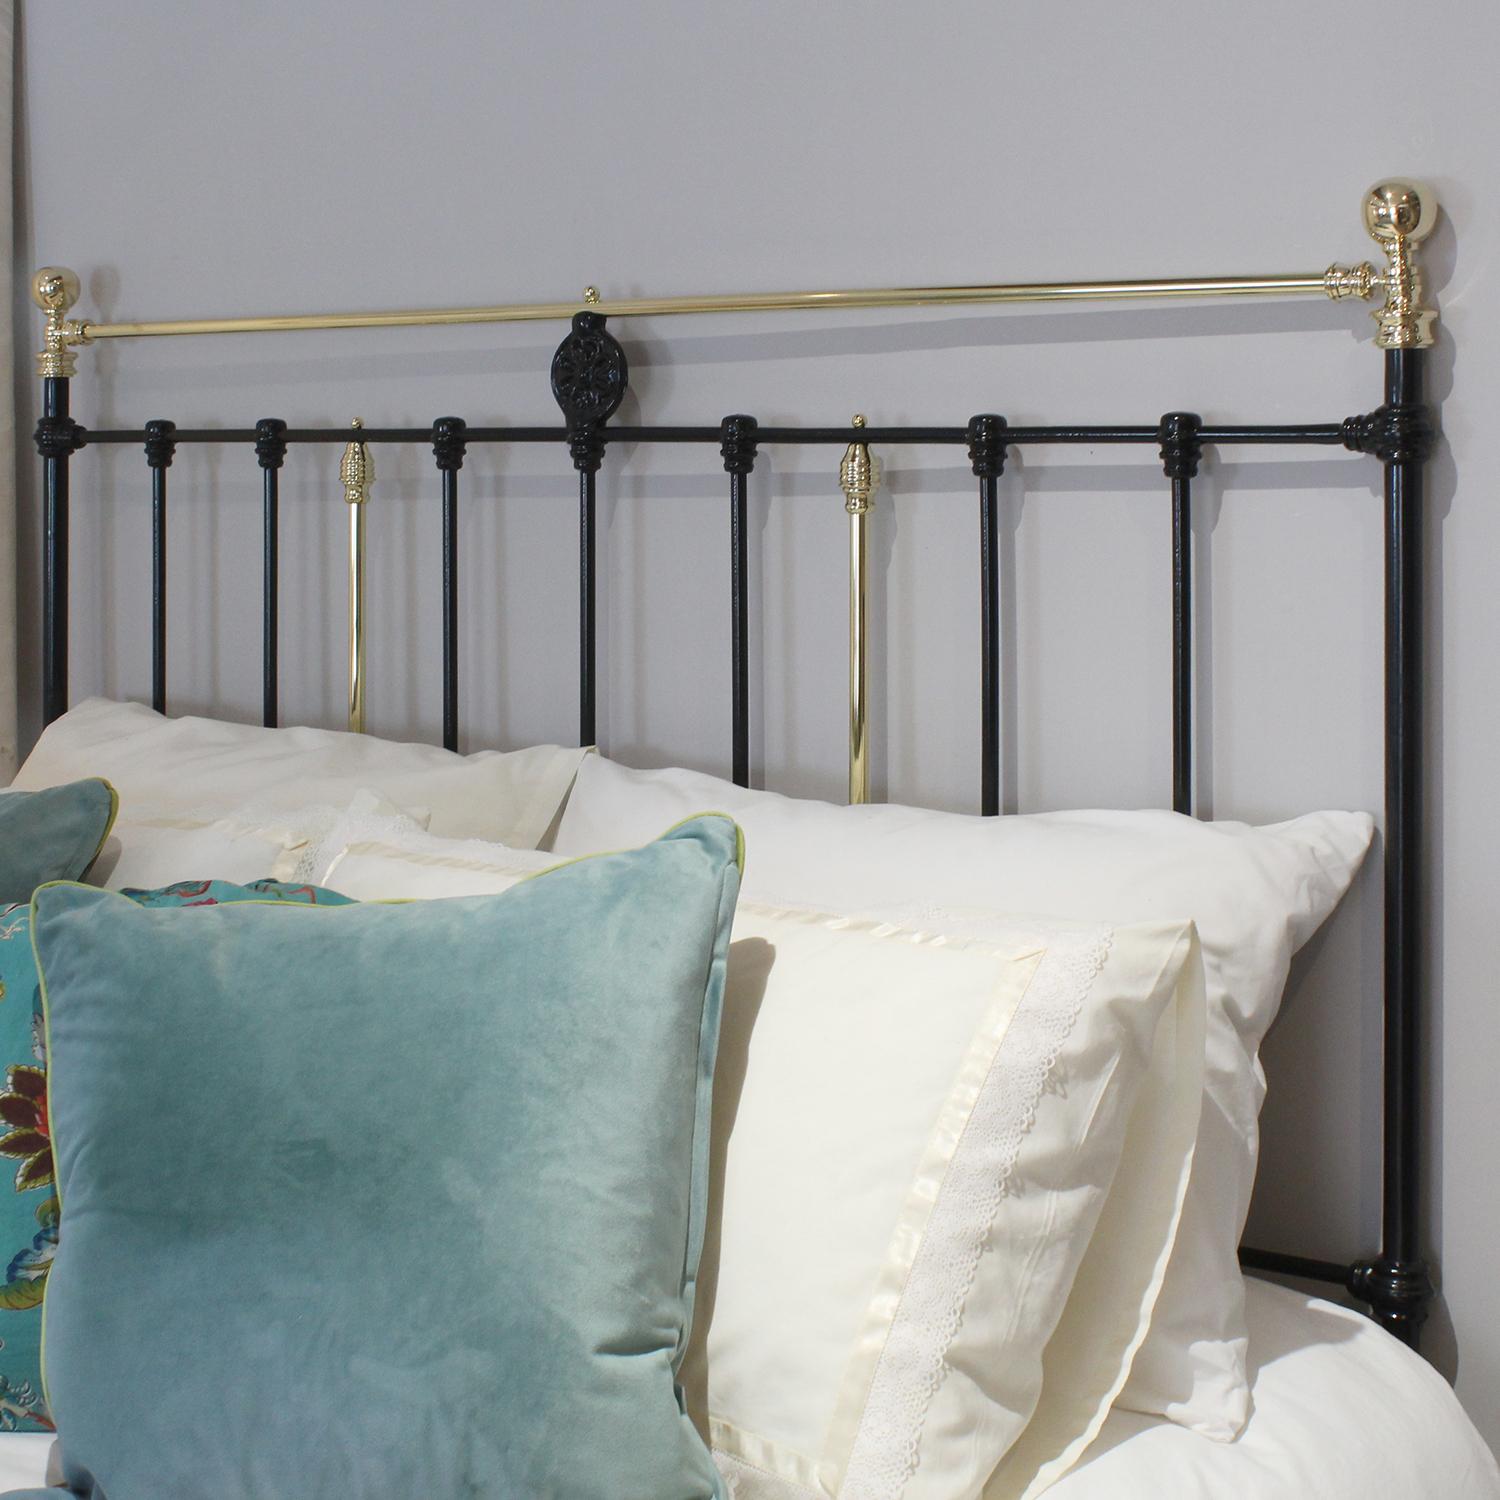 cast iron bed frame